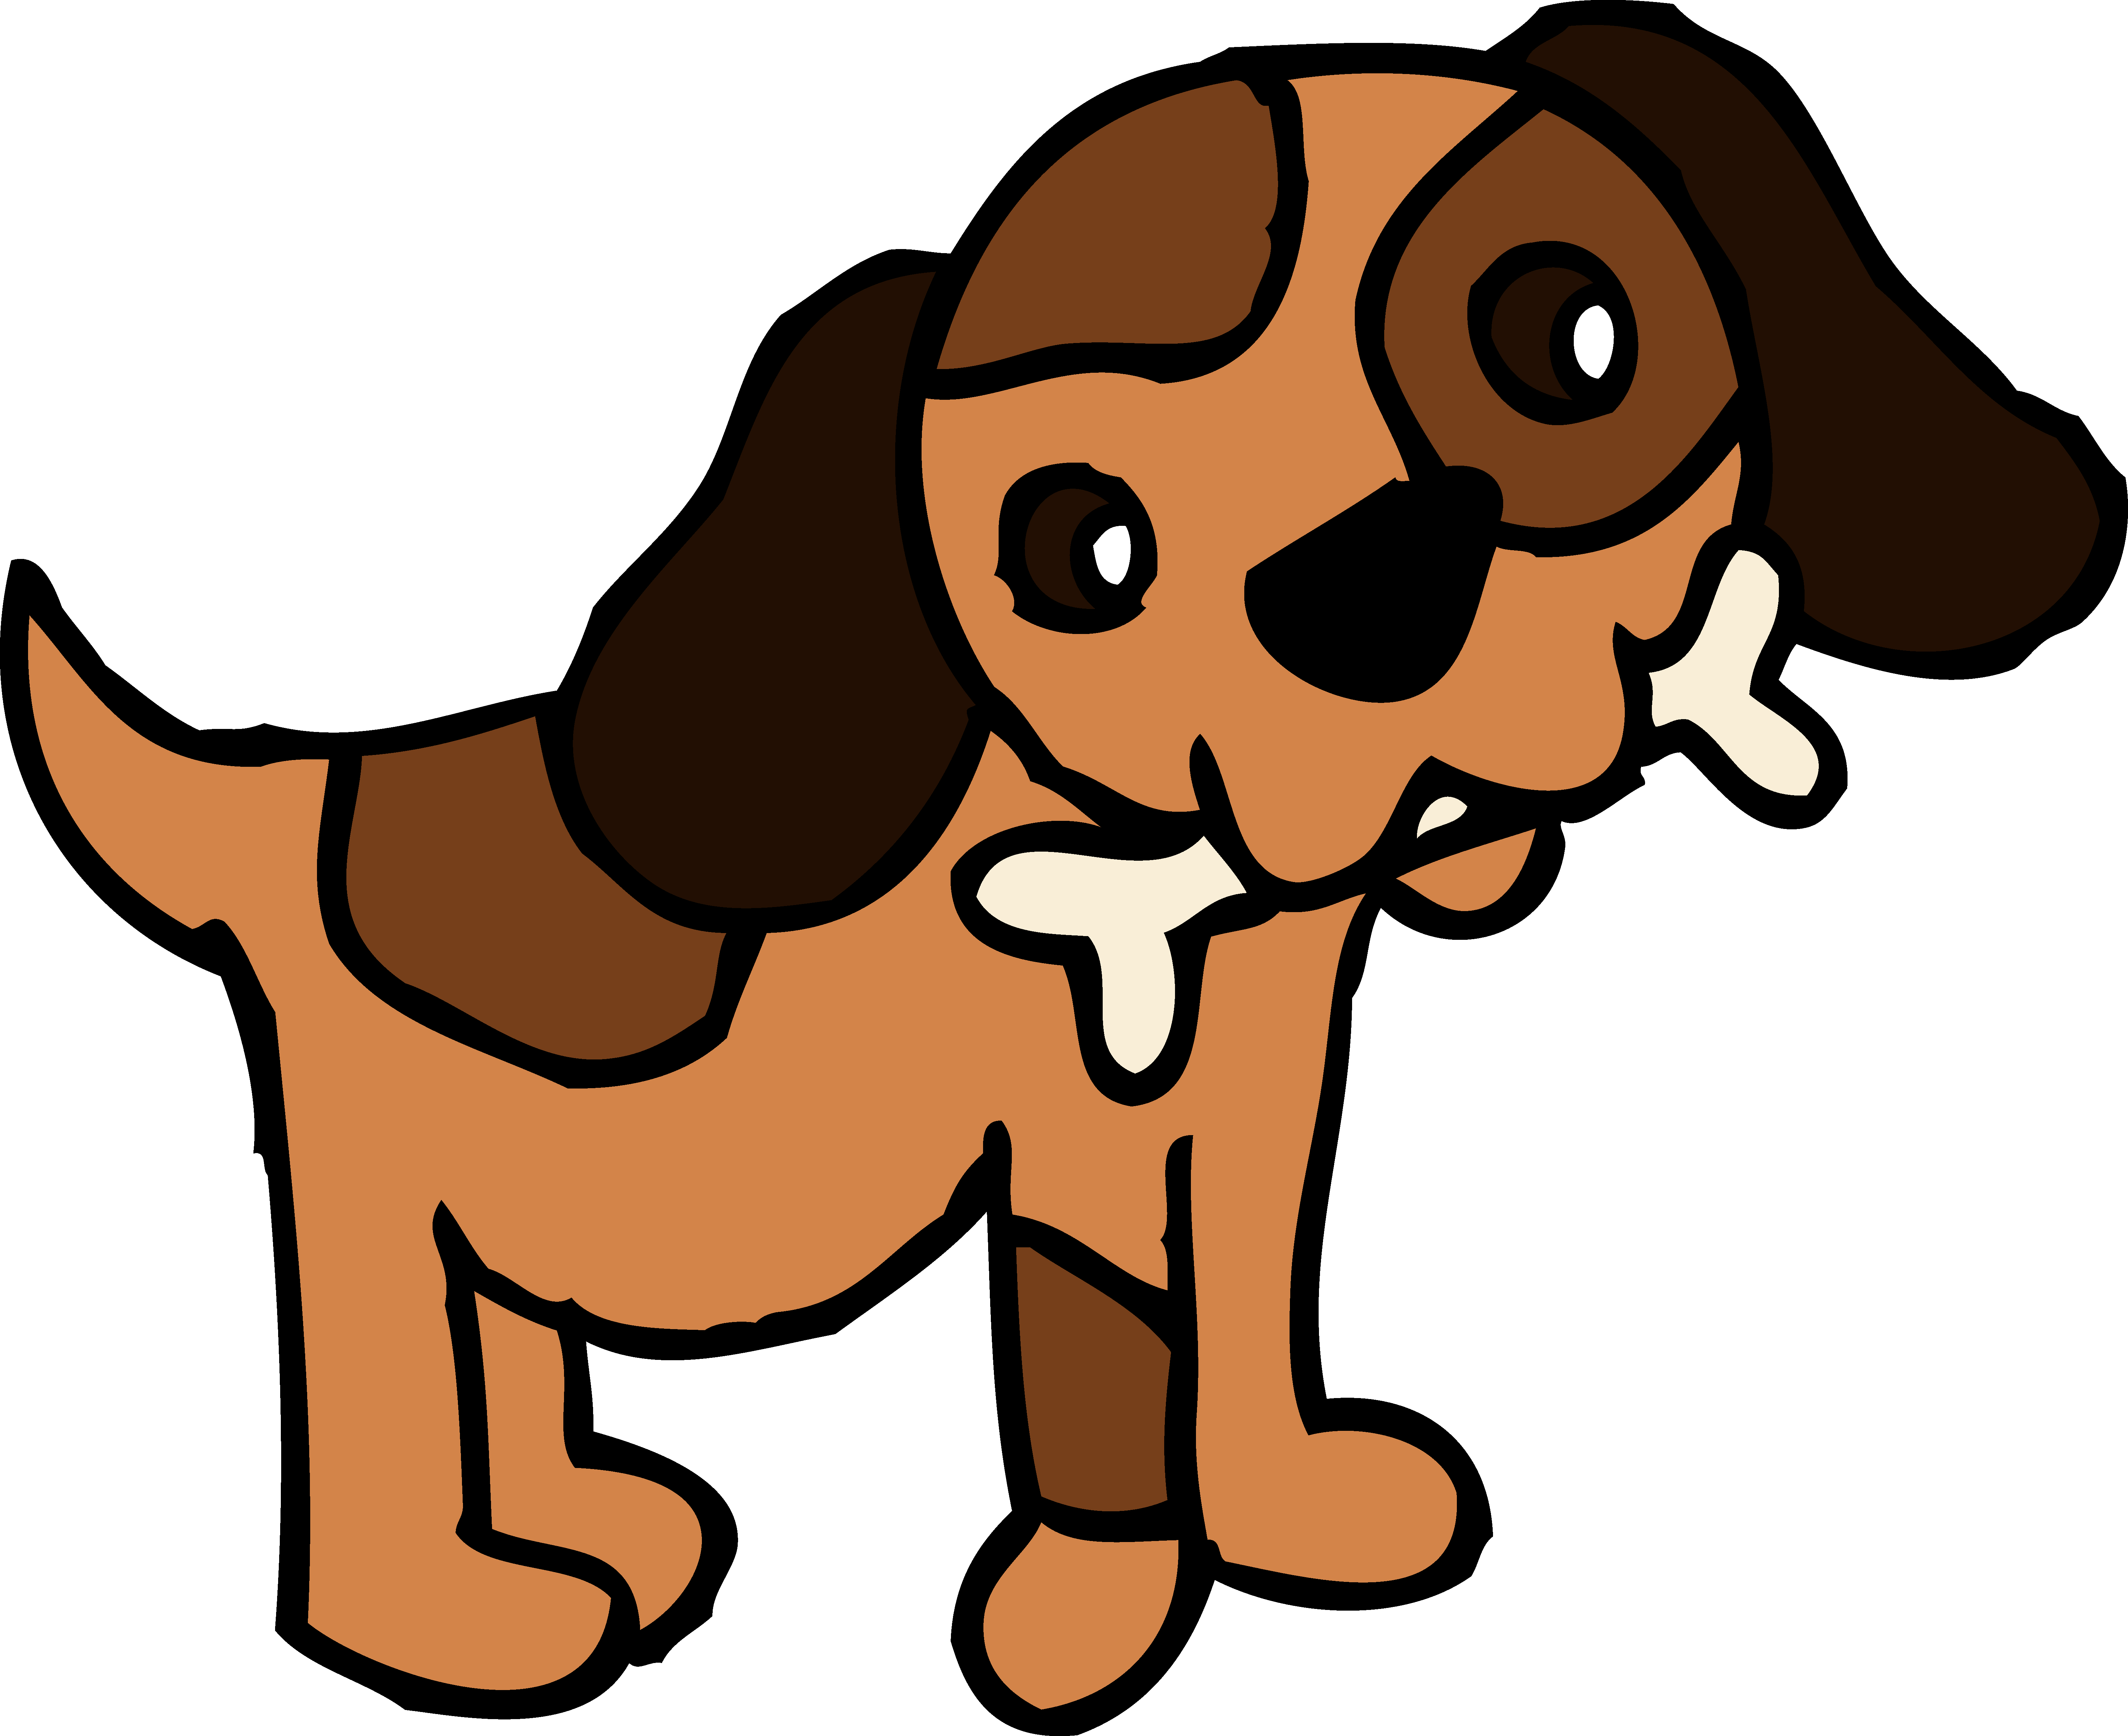 Ducks clipart dog.  collection of thanksgiving